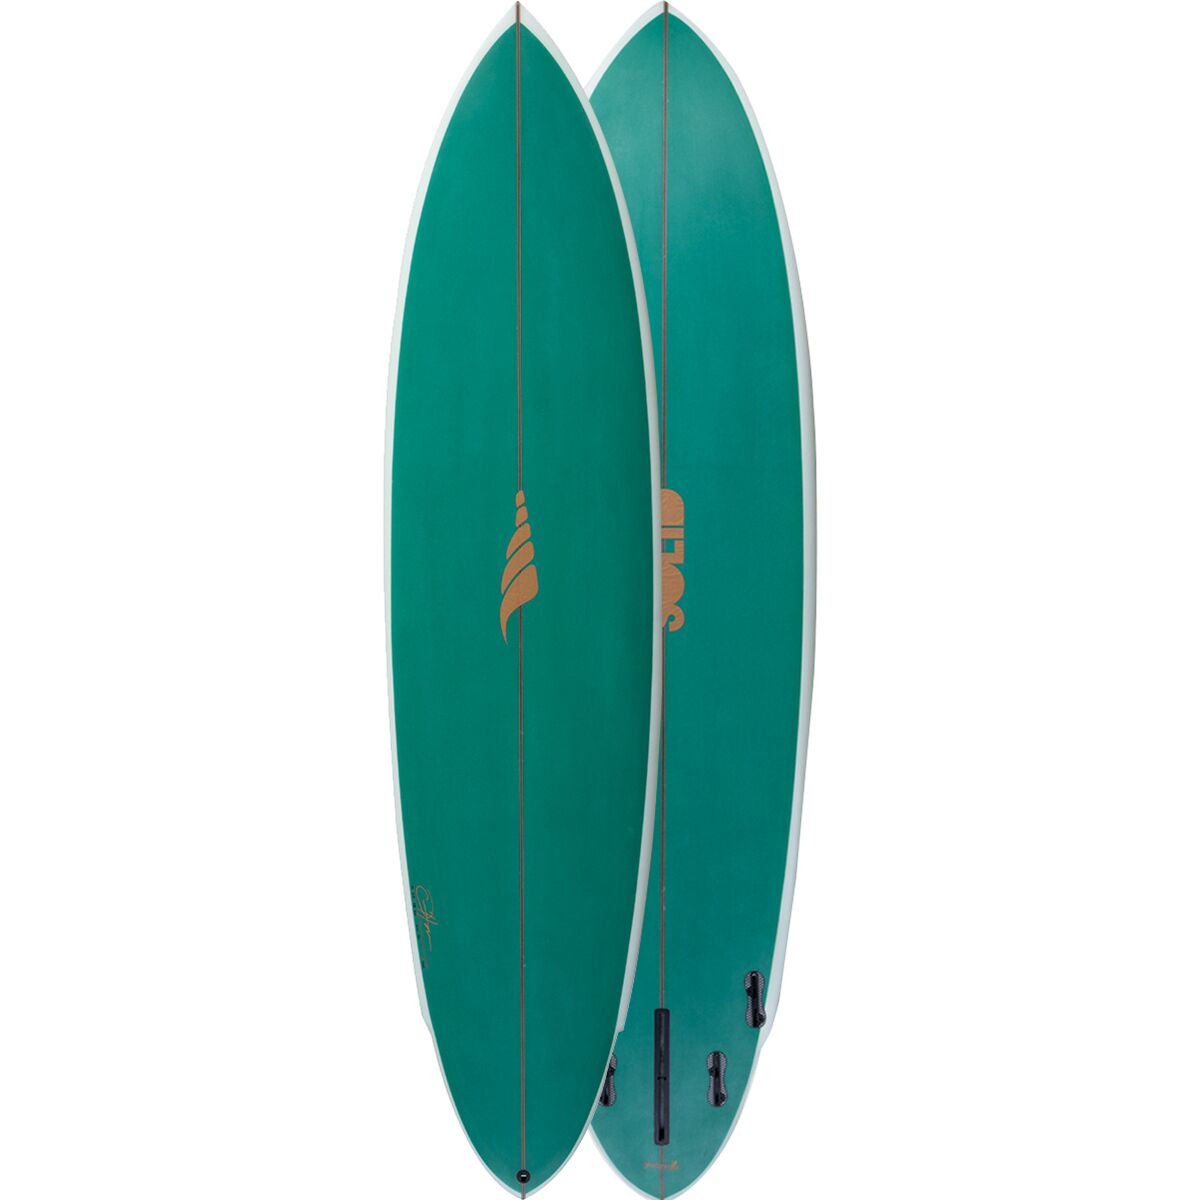 Solid Surfboards King Pin Surfboard